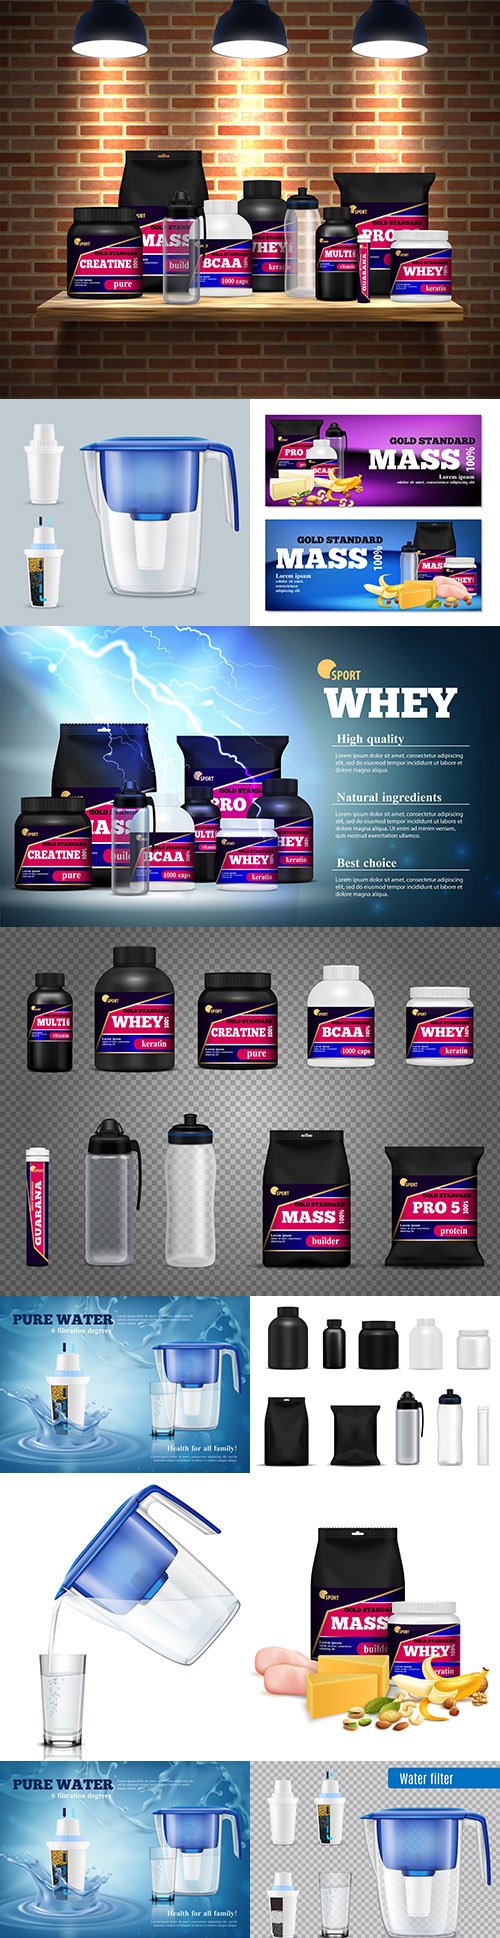 Fitness, sports food and filit for water realistic illustrations